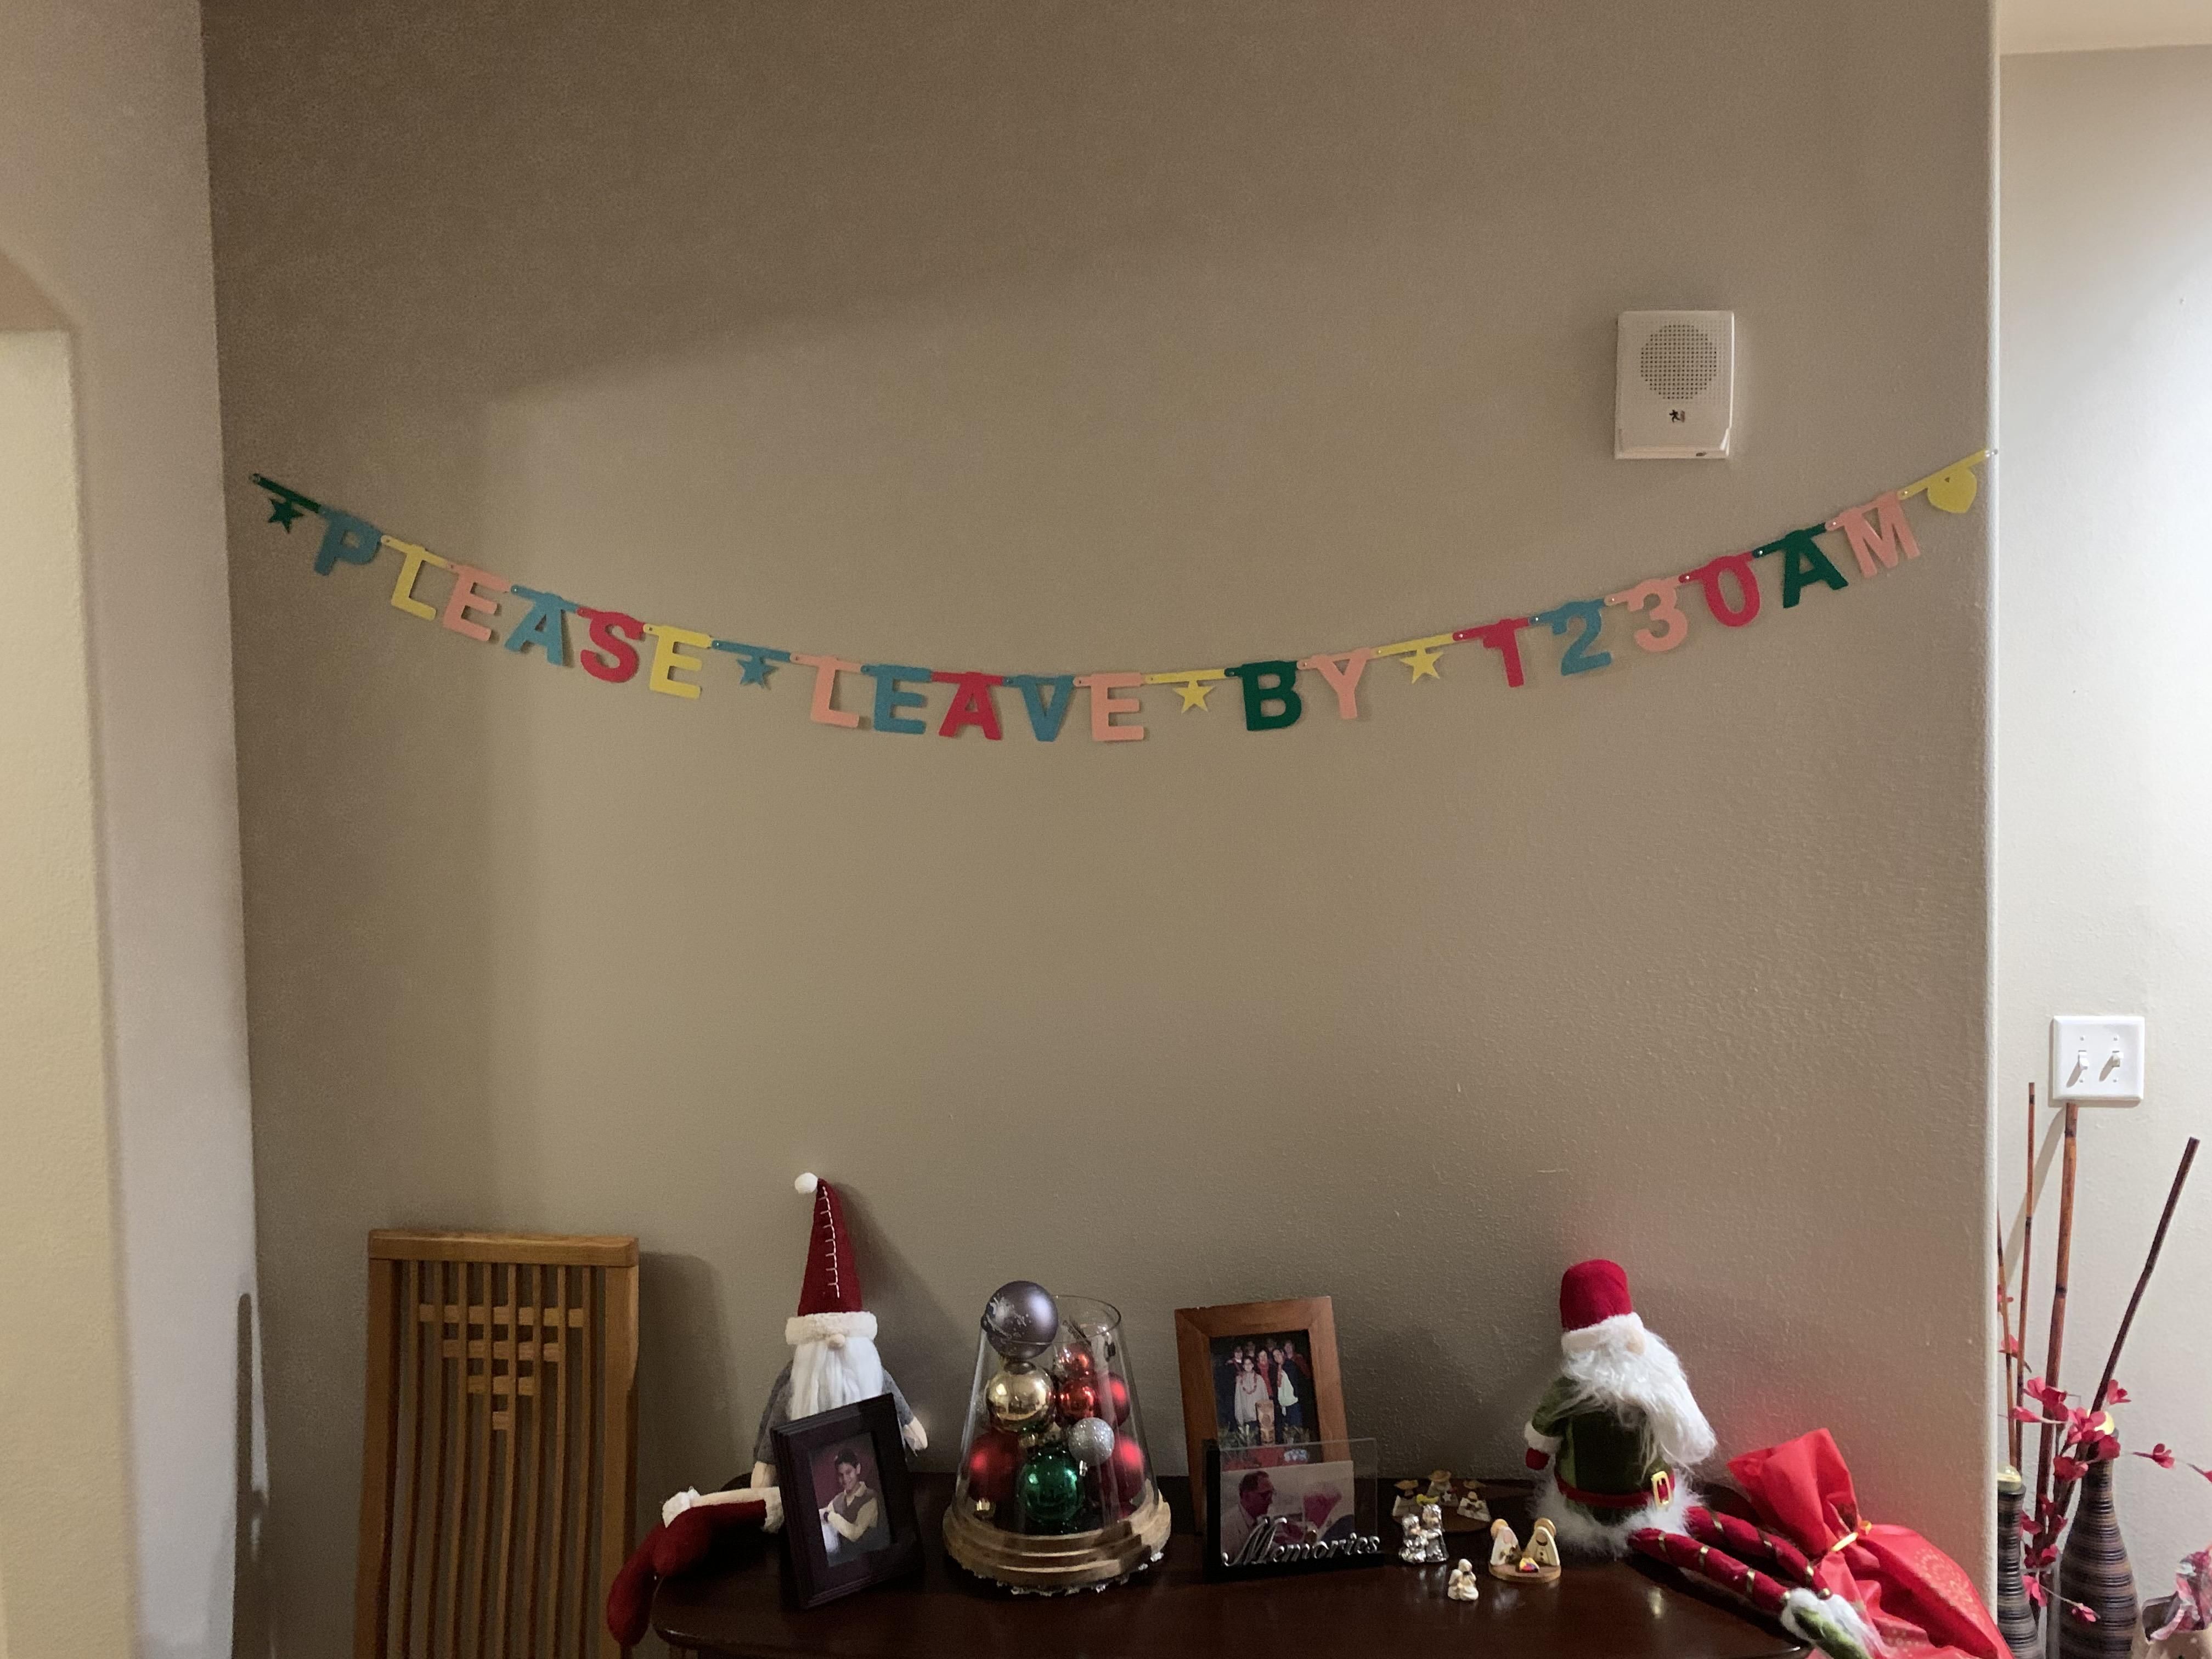 Mom asked me to decorate for our NYE party.